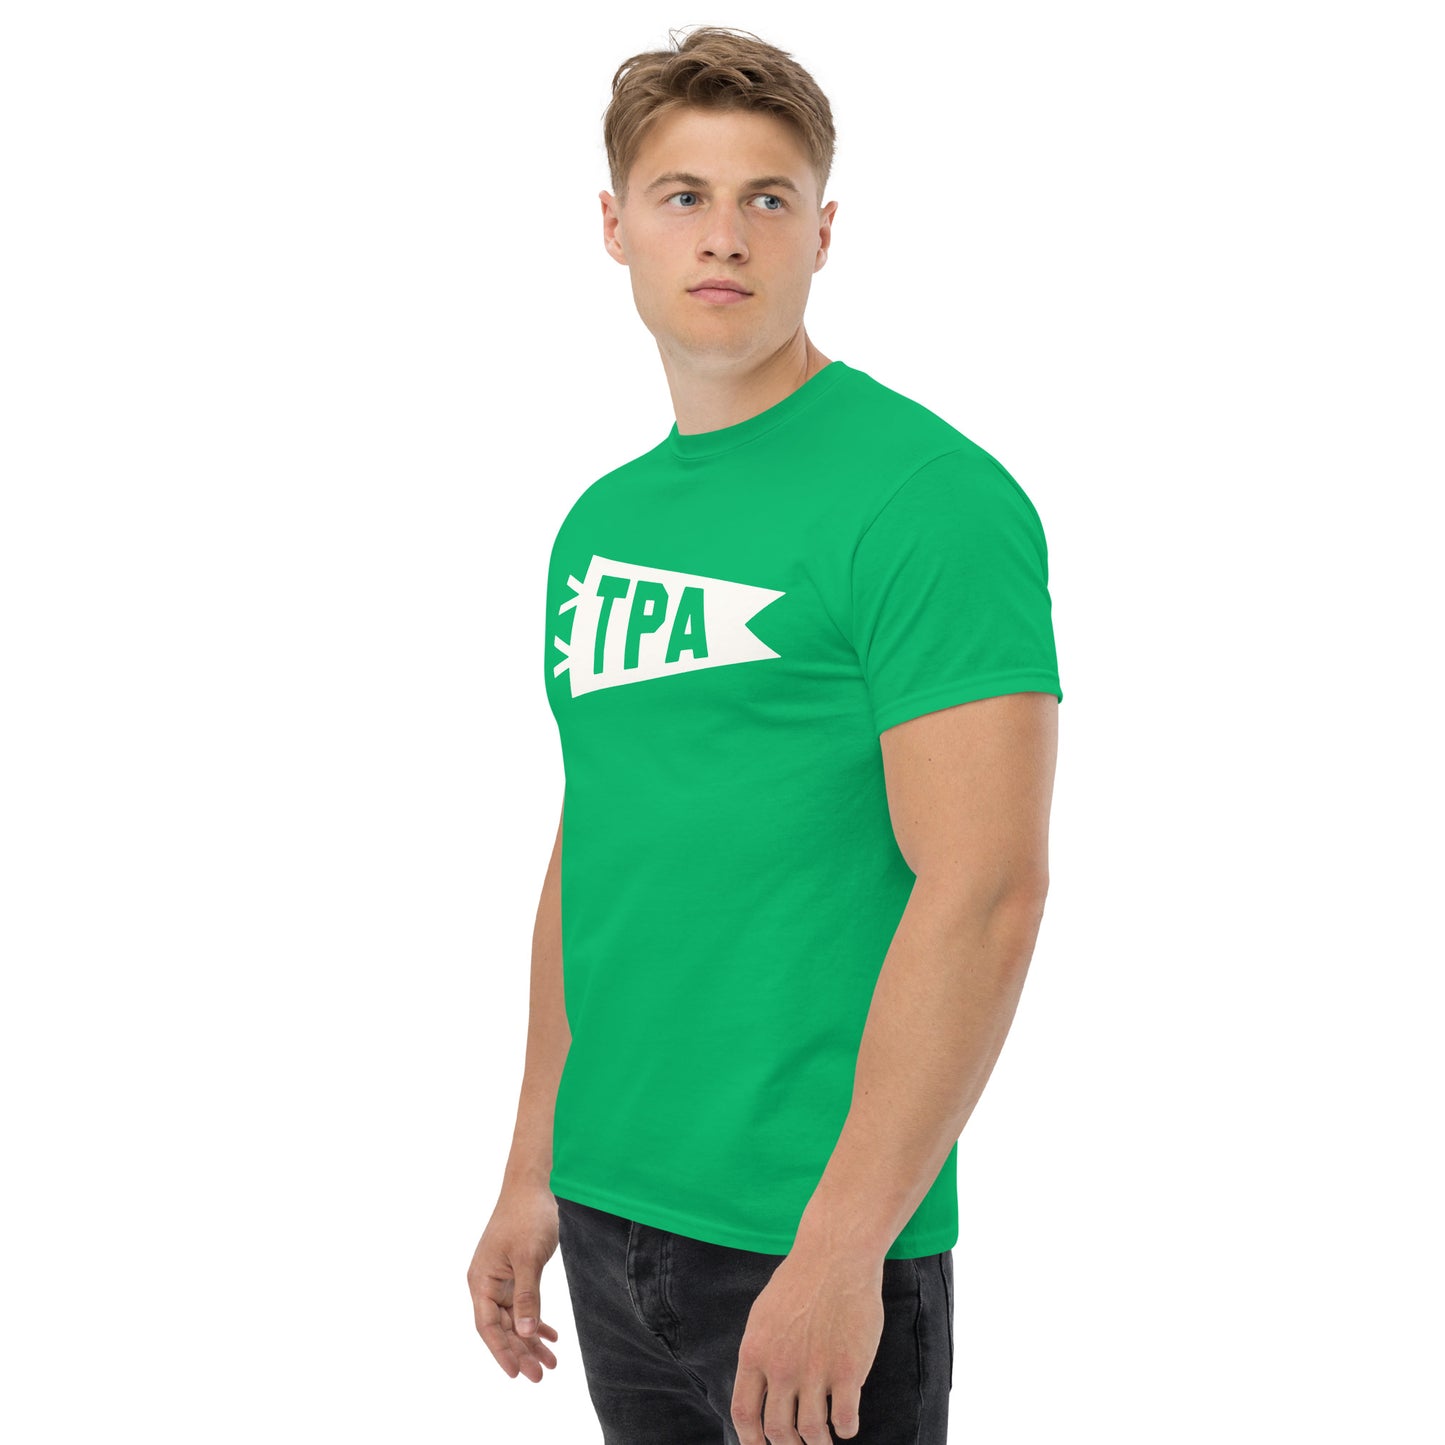 Airport Code Men's T-Shirt - White Graphic • TPA Tampa • YHM Designs - Image 05